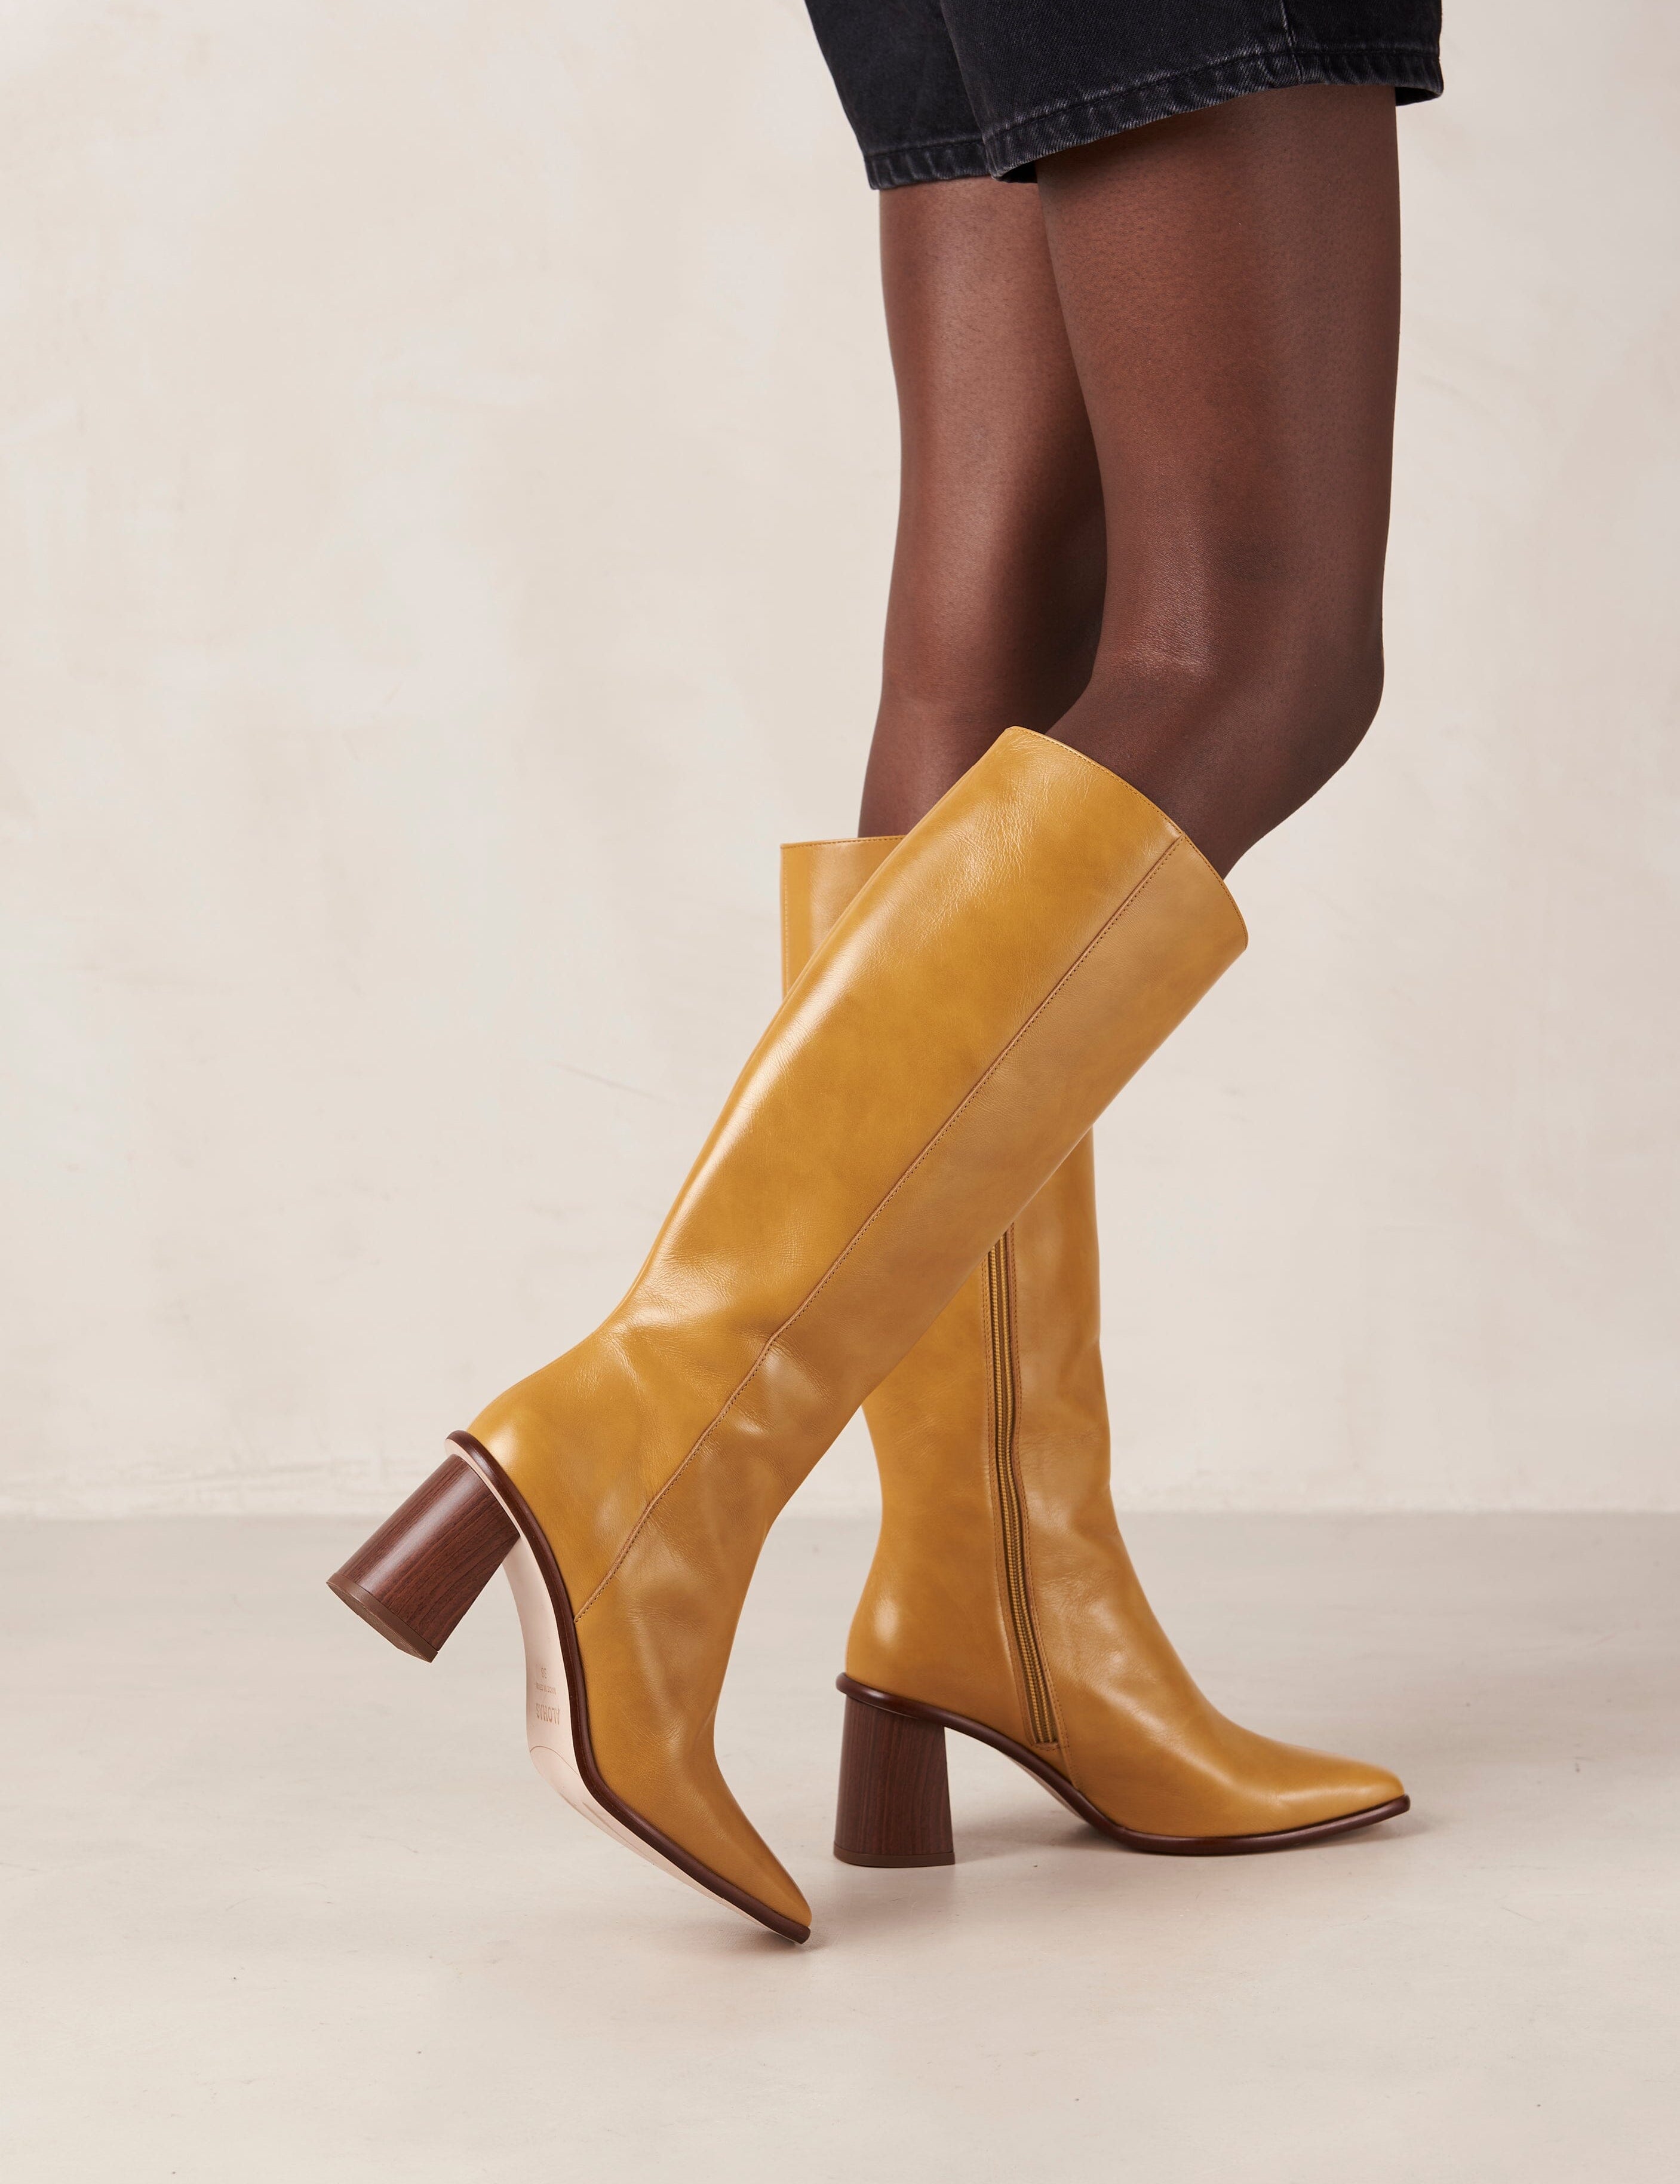 east-marigold-yellow-leather-boots-boots-alohas-438212_3000x_c4c56d3b-5a0a-4939-9adf-df404cdc51c0.jpg